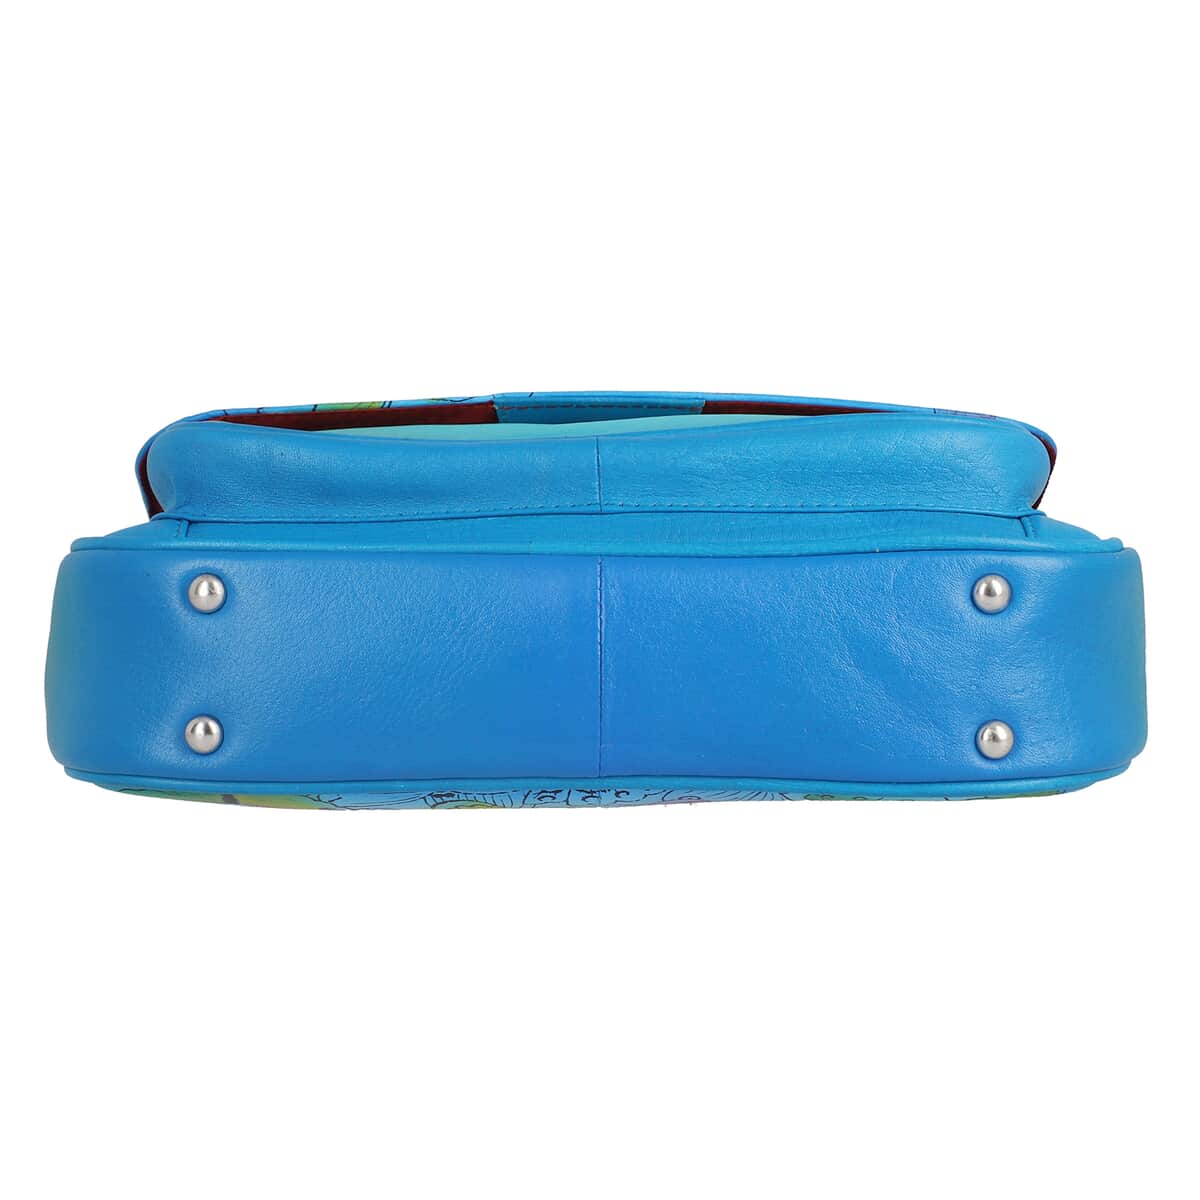 "SUKRITI 100% Genuine Leather Crossbody Bag Theme: Butterfly Color: Blue Size: 10 x 3 x 7 inches" image number 5